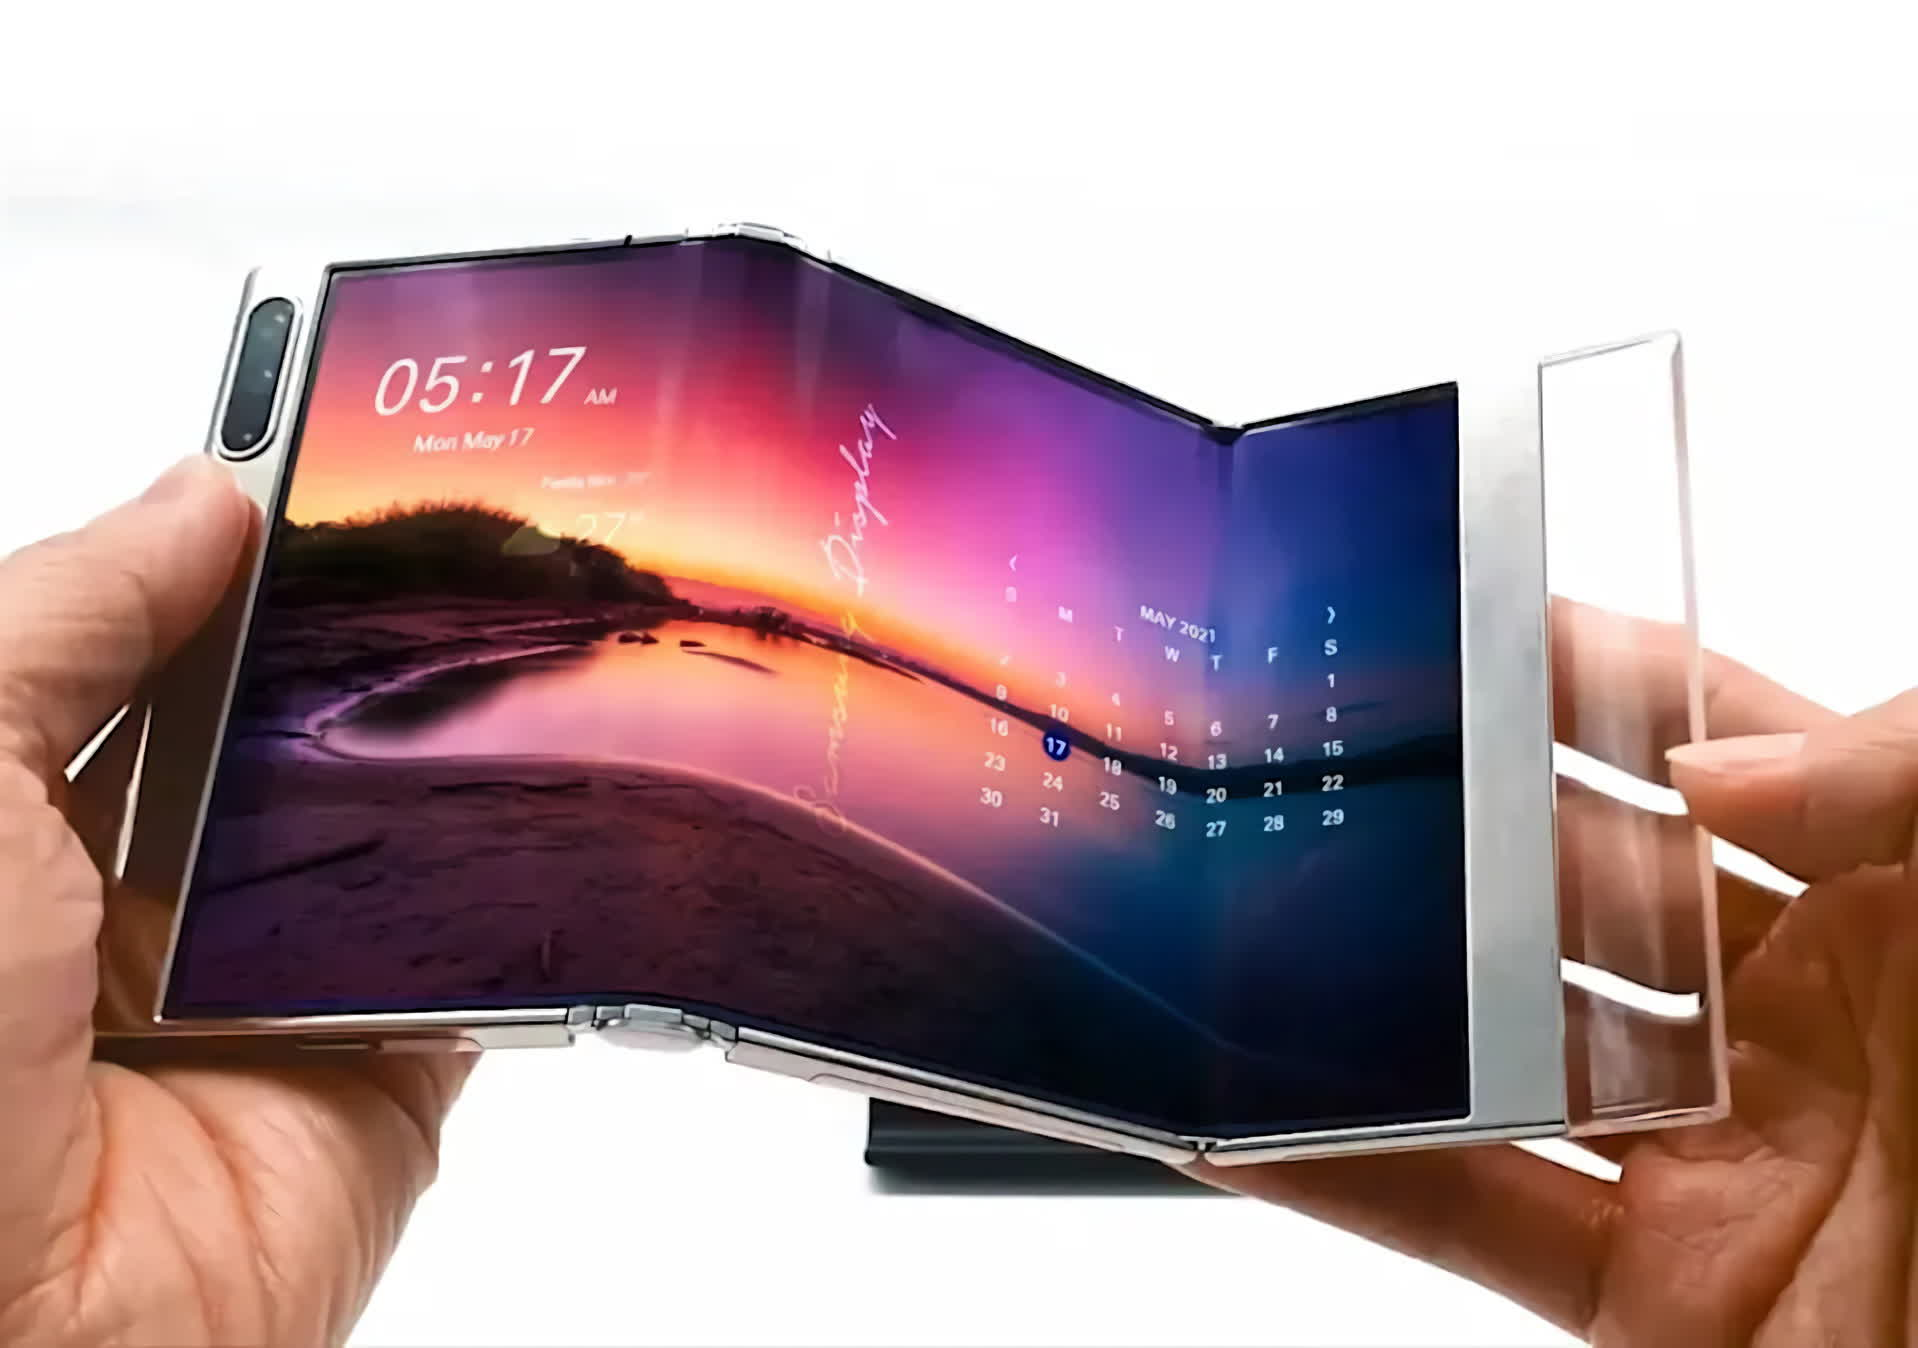 Samsung brings new concepts to mobile display technology